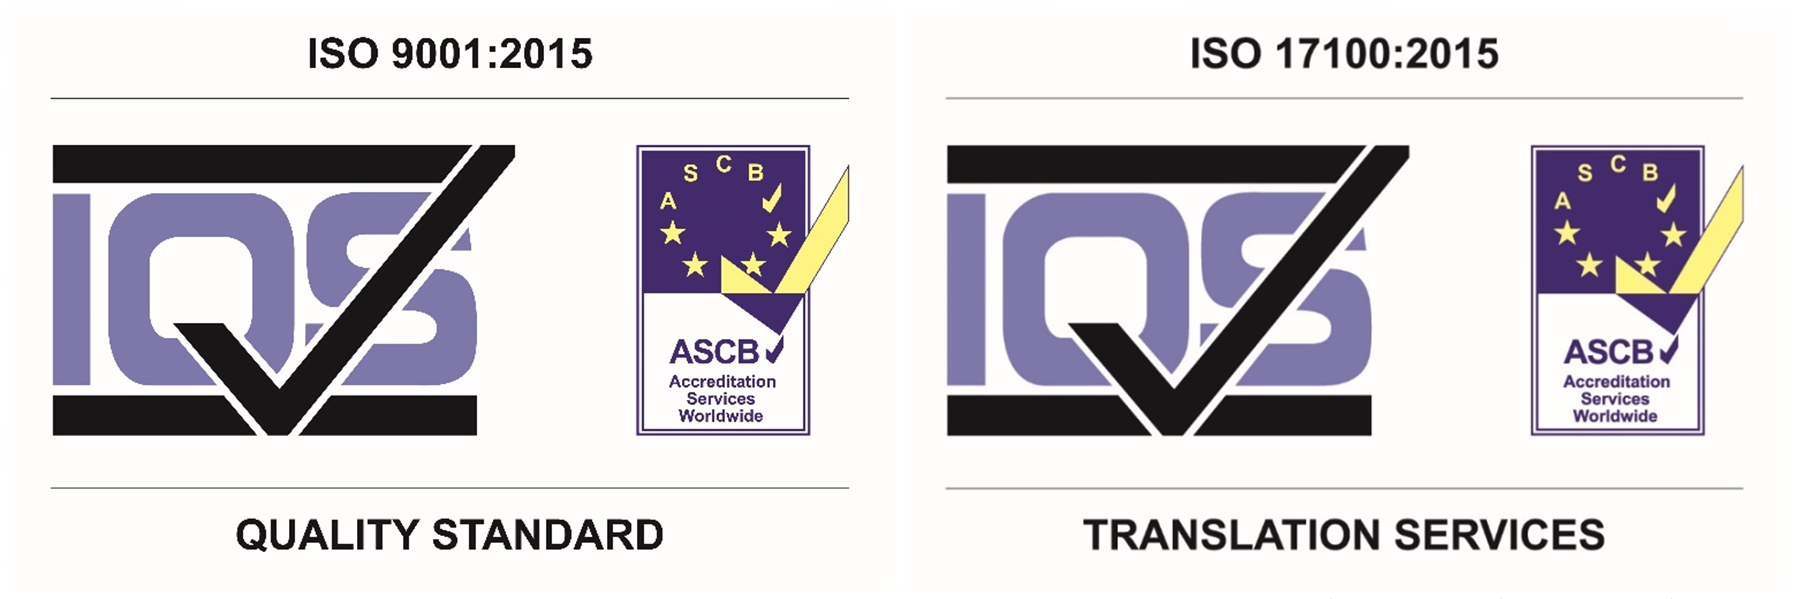 ISO9001:2015 and 17100:2015